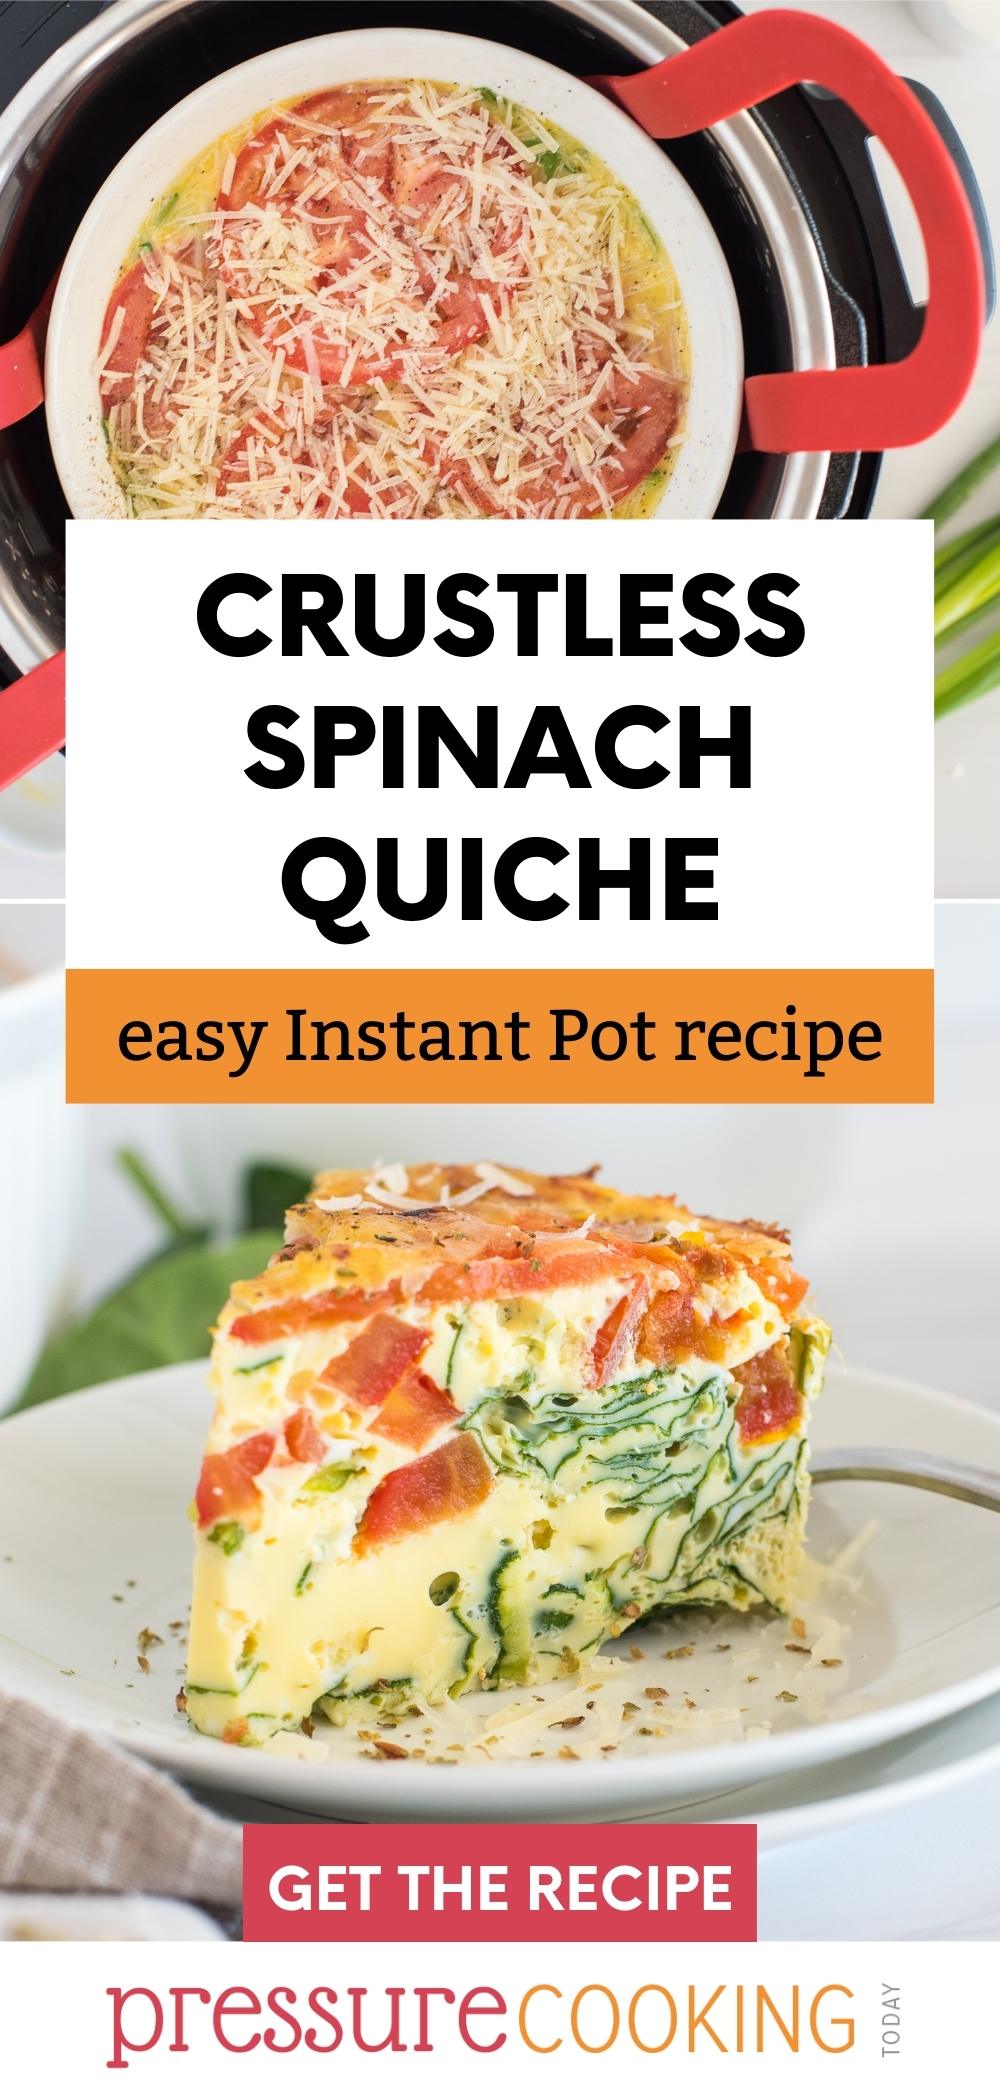 Crustless spinach quiche made in an Instant Pot is light, fluffy, and mostly hands-off, making this Instant Pot quiche recipe a delicious and healthy breakfast or brunch. This crustless quiche is also meatless, so it is perfect for vegetarian and gluten free diets. #instantpot #pressurecooking #brunch #quiche #glutenfree #vegetarian via @PressureCook2da